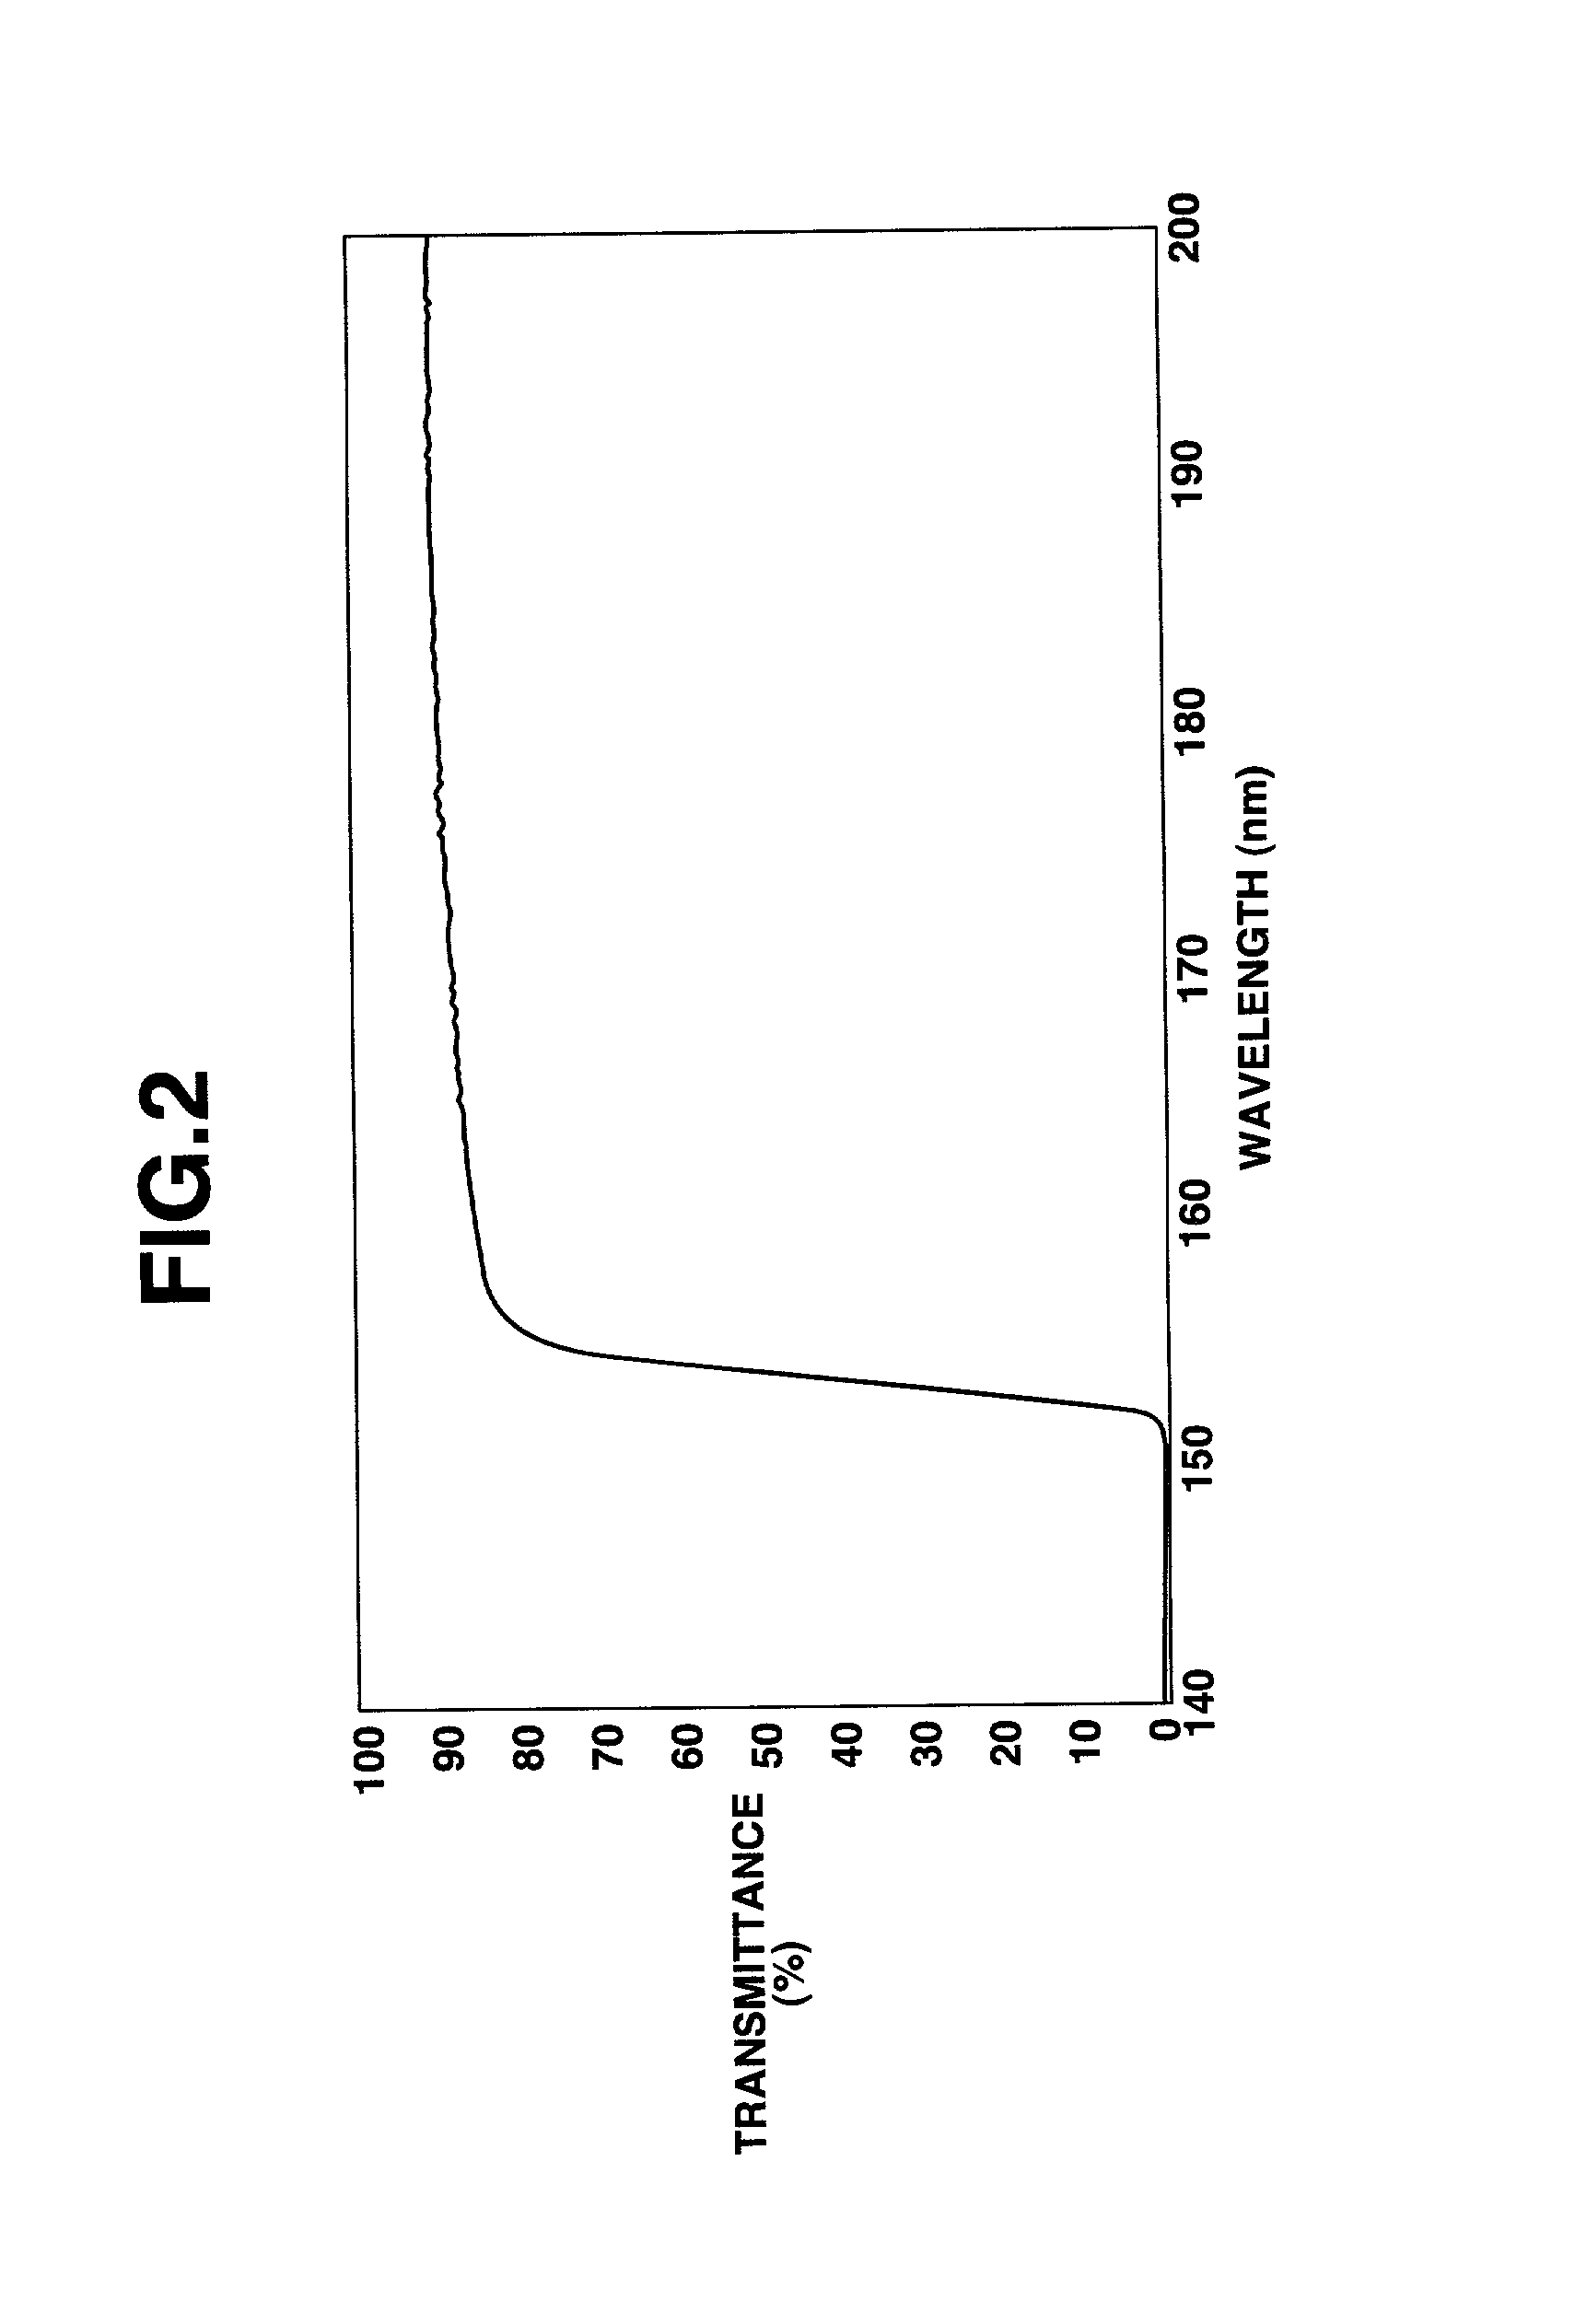 Synthetic qurtz glass and method of production